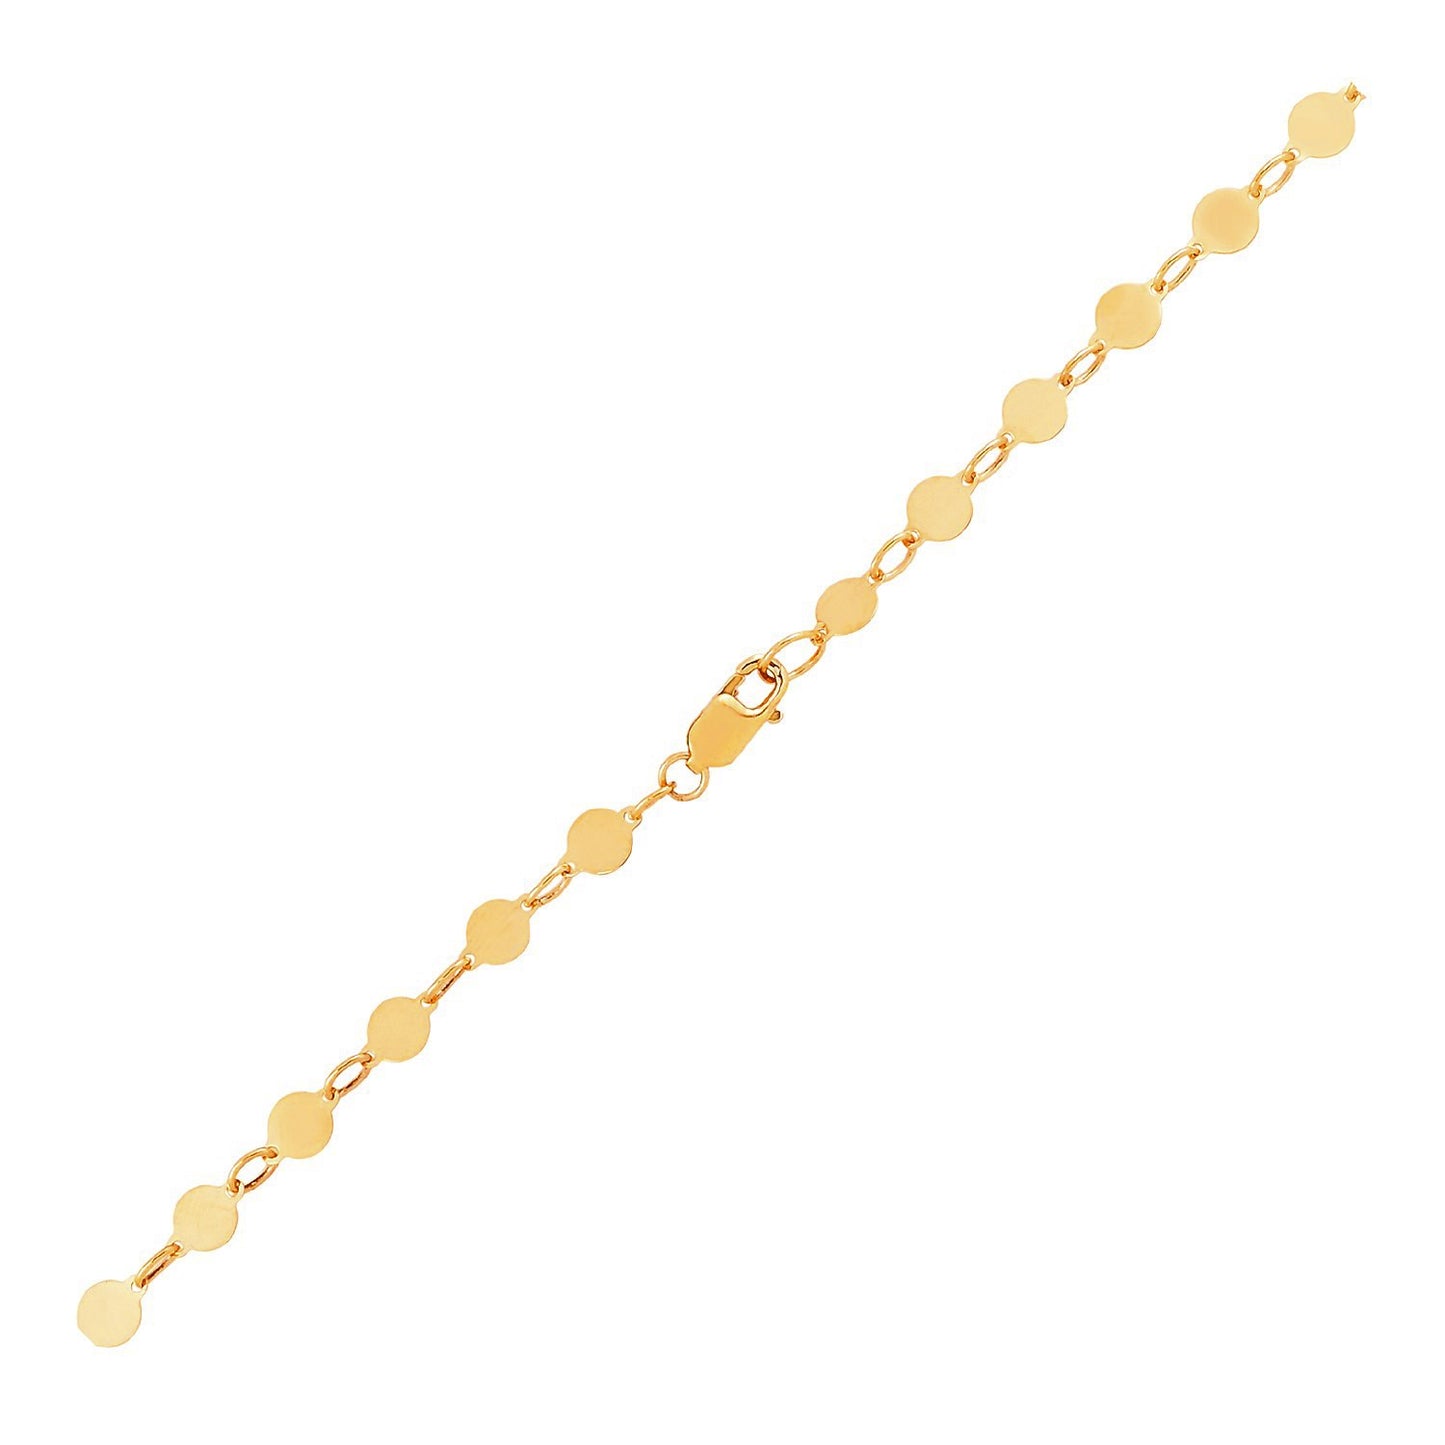 14k Yellow Gold Bracelet with Polished Circles